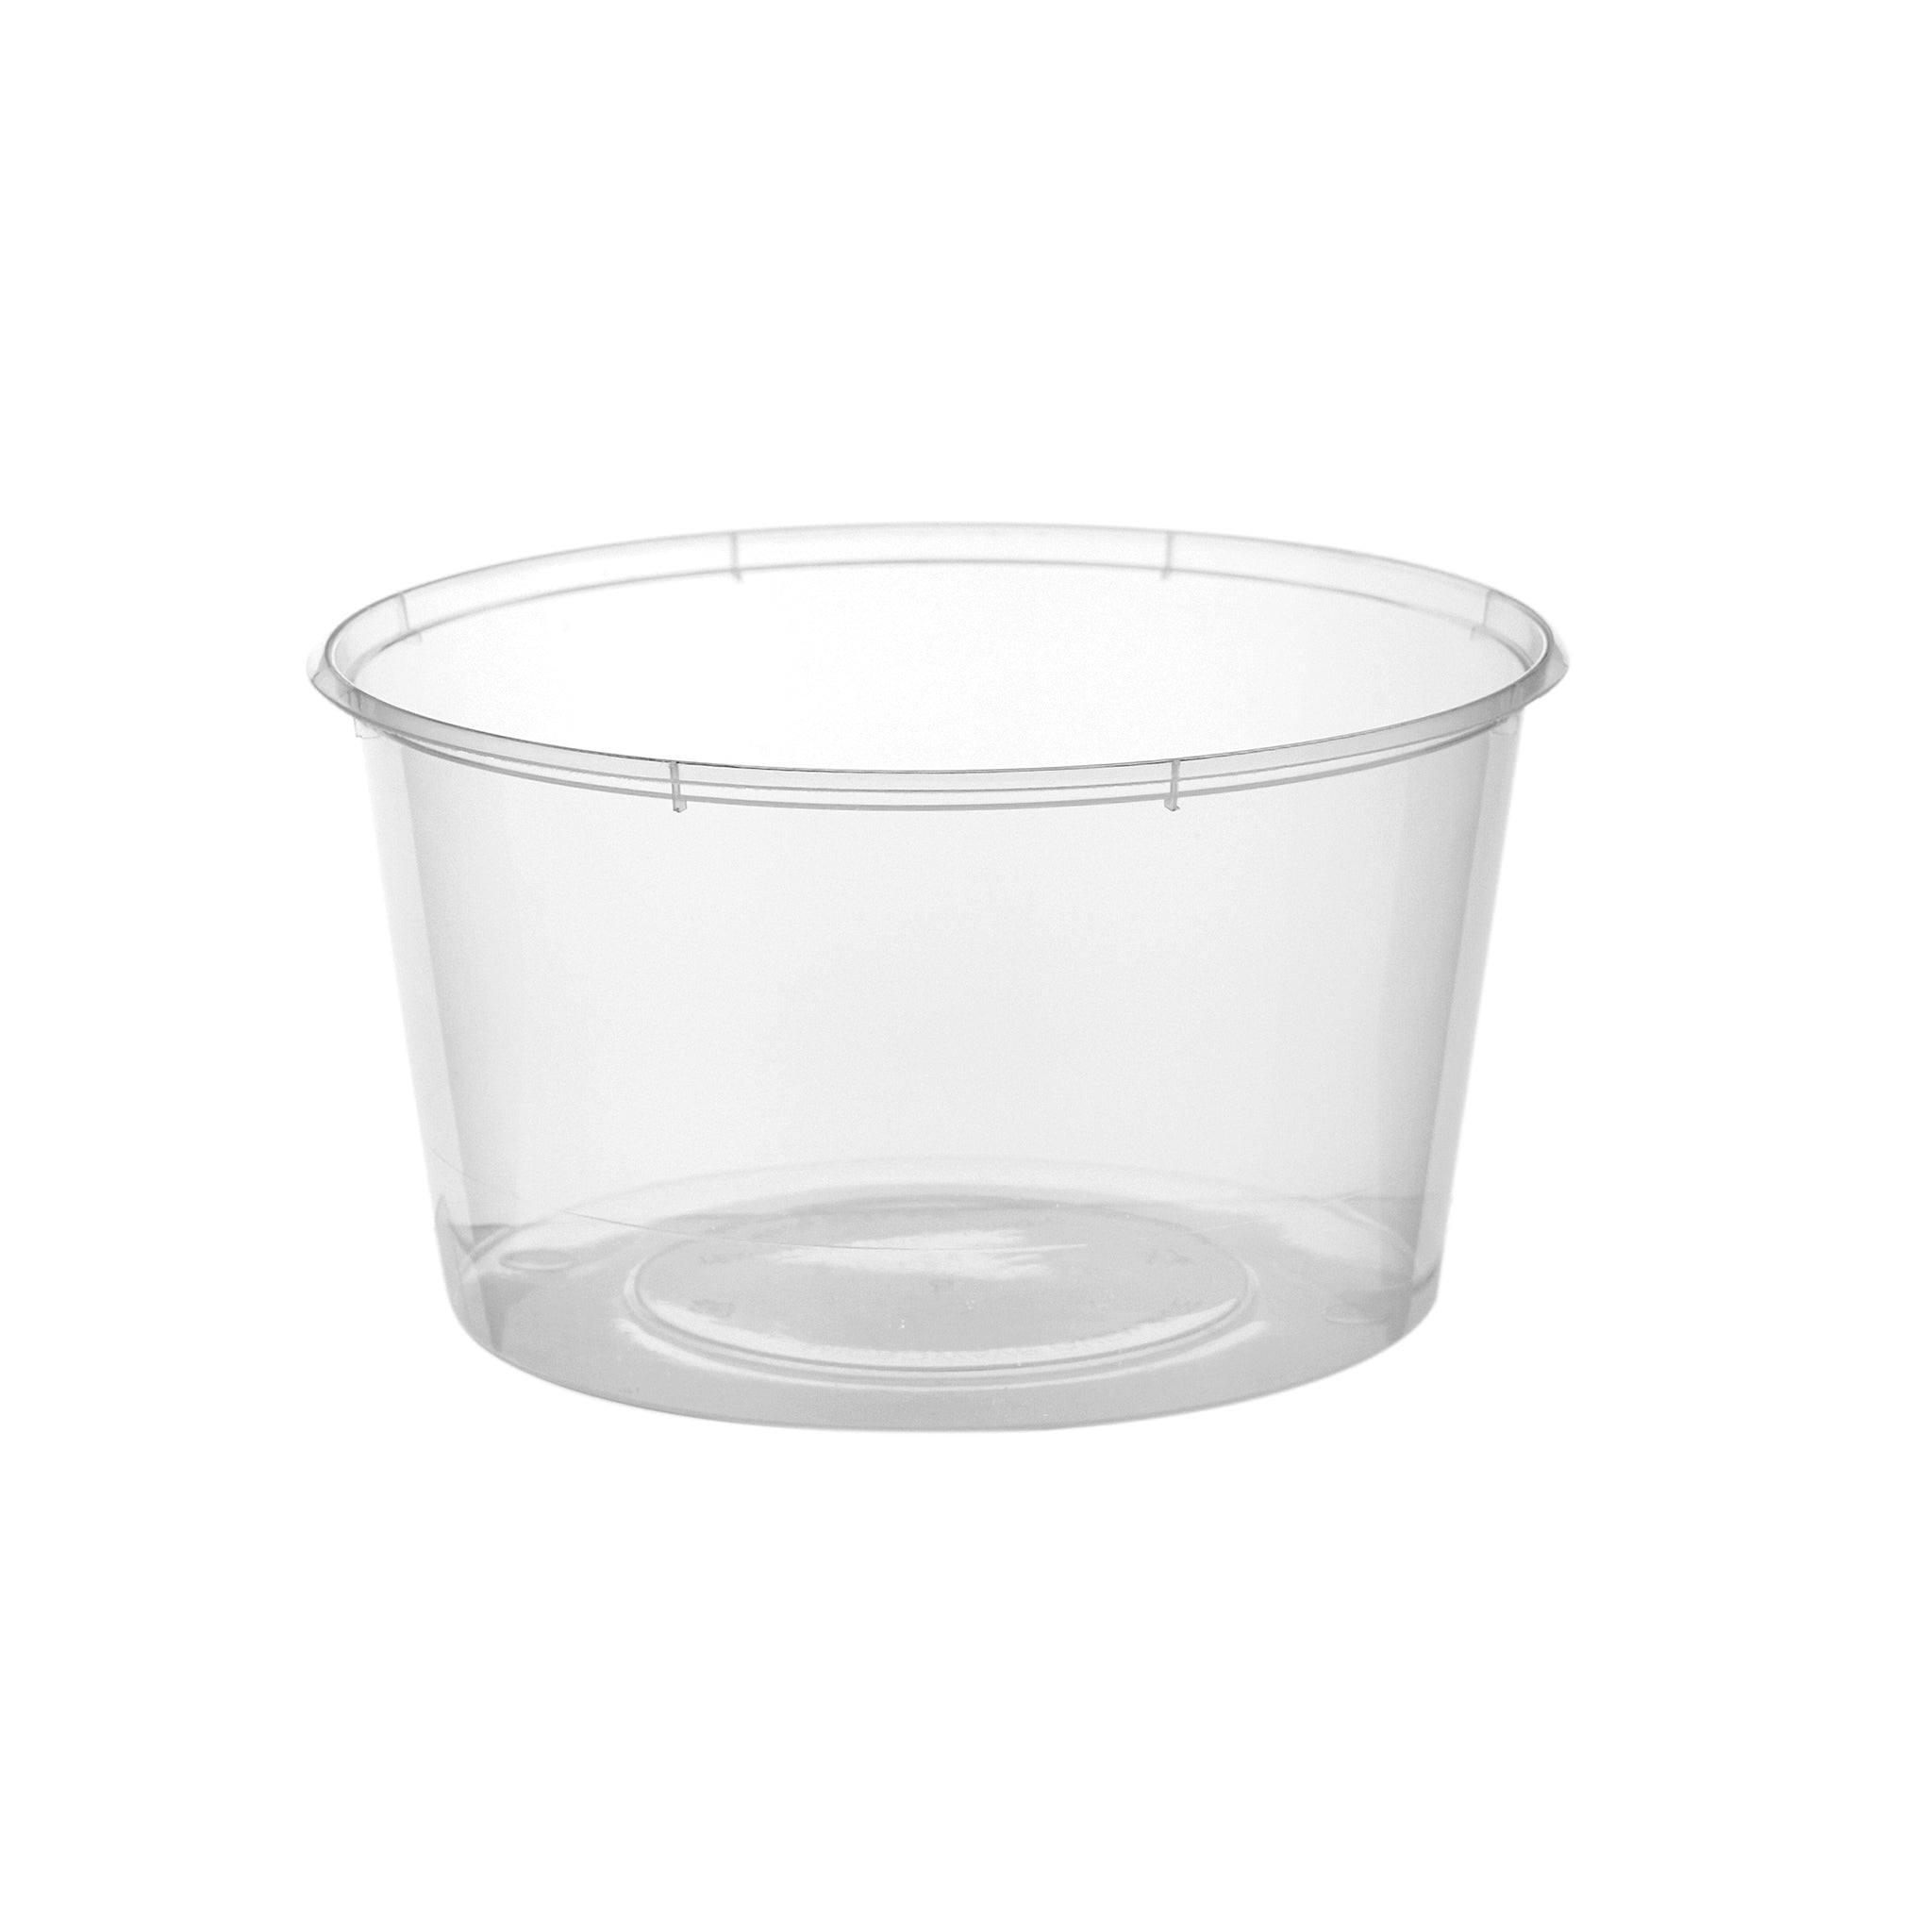 250ml clear microwavable container and lids